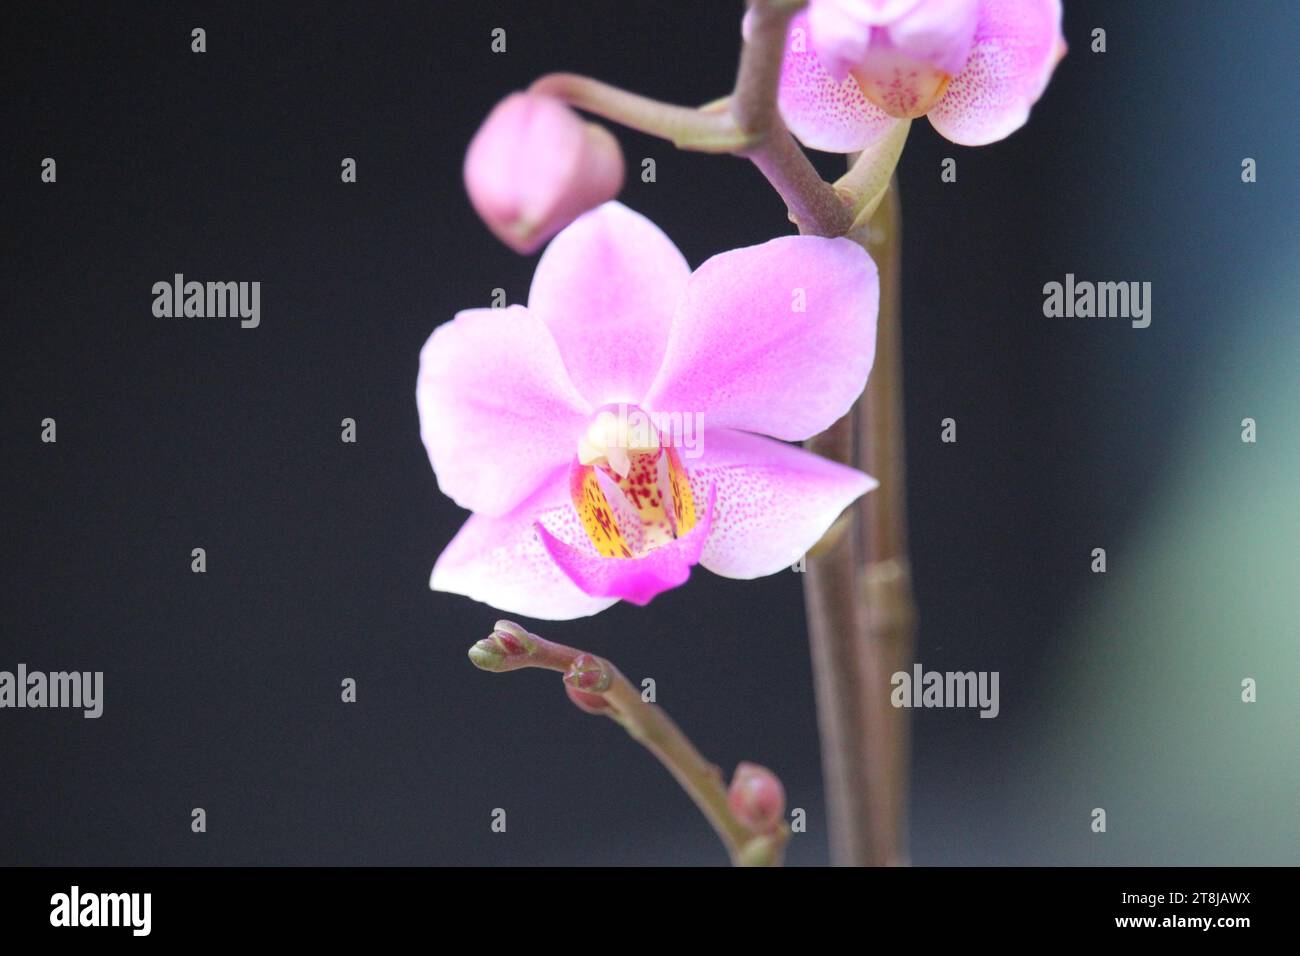 purple doritis orchid flower with blurry background Stock Photo